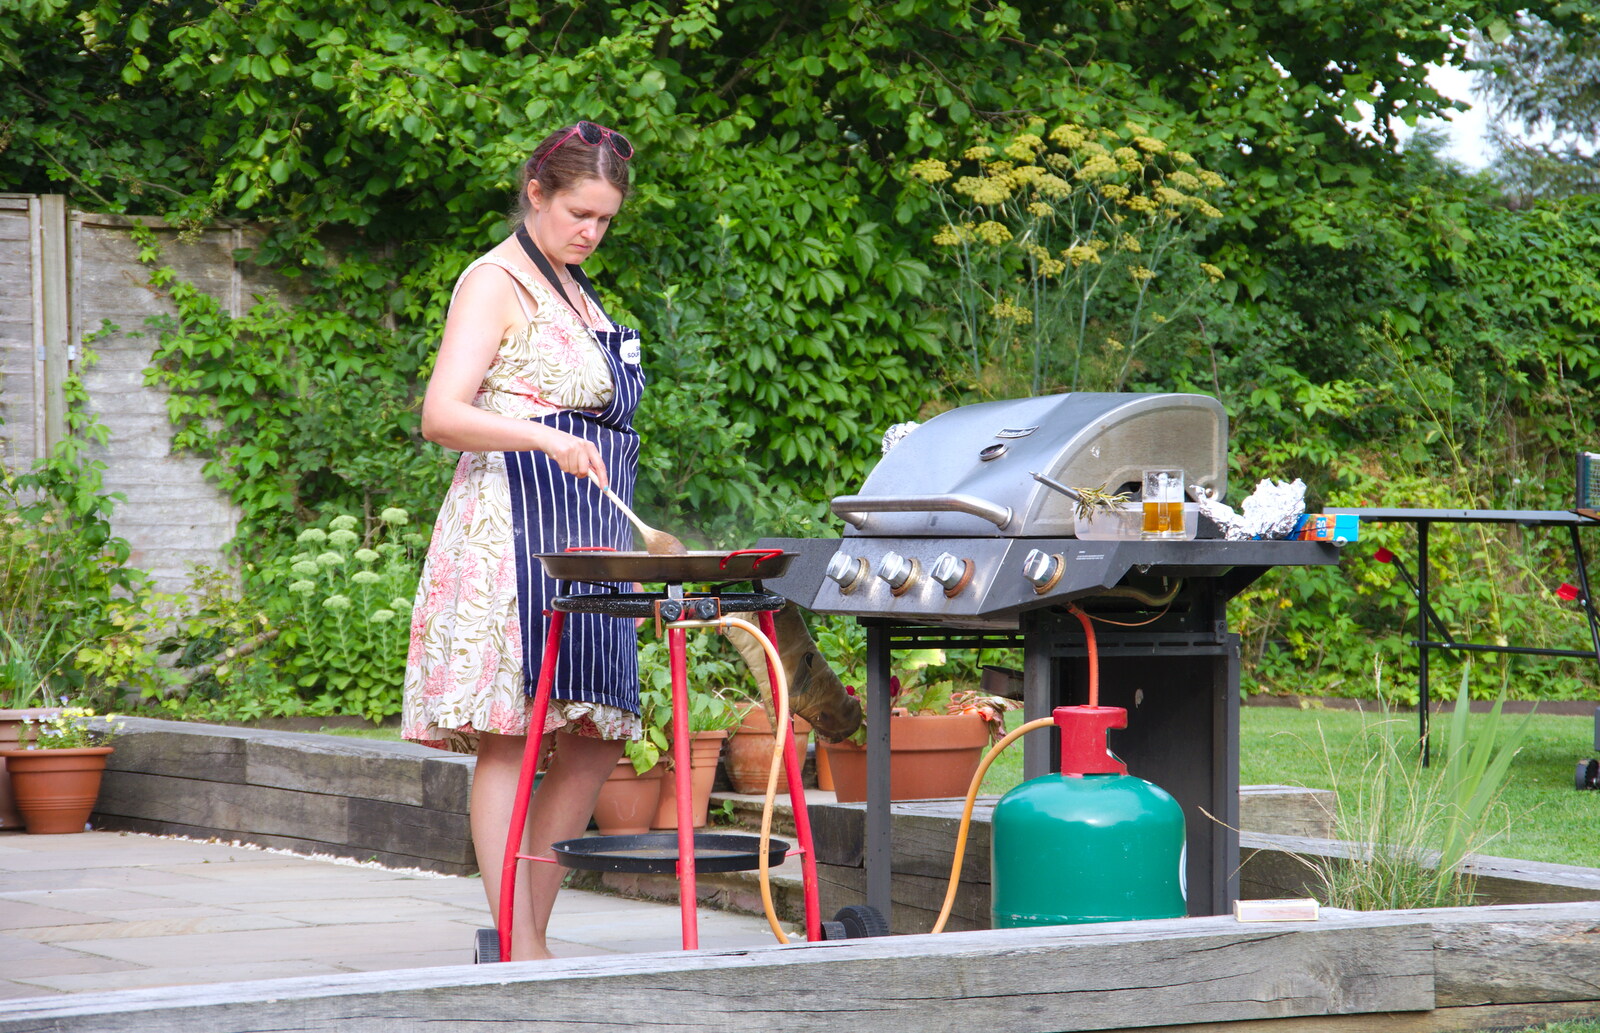 Isobel pokes the paella from A Summer Party, Brome, Suffolk - 3rd August 2019